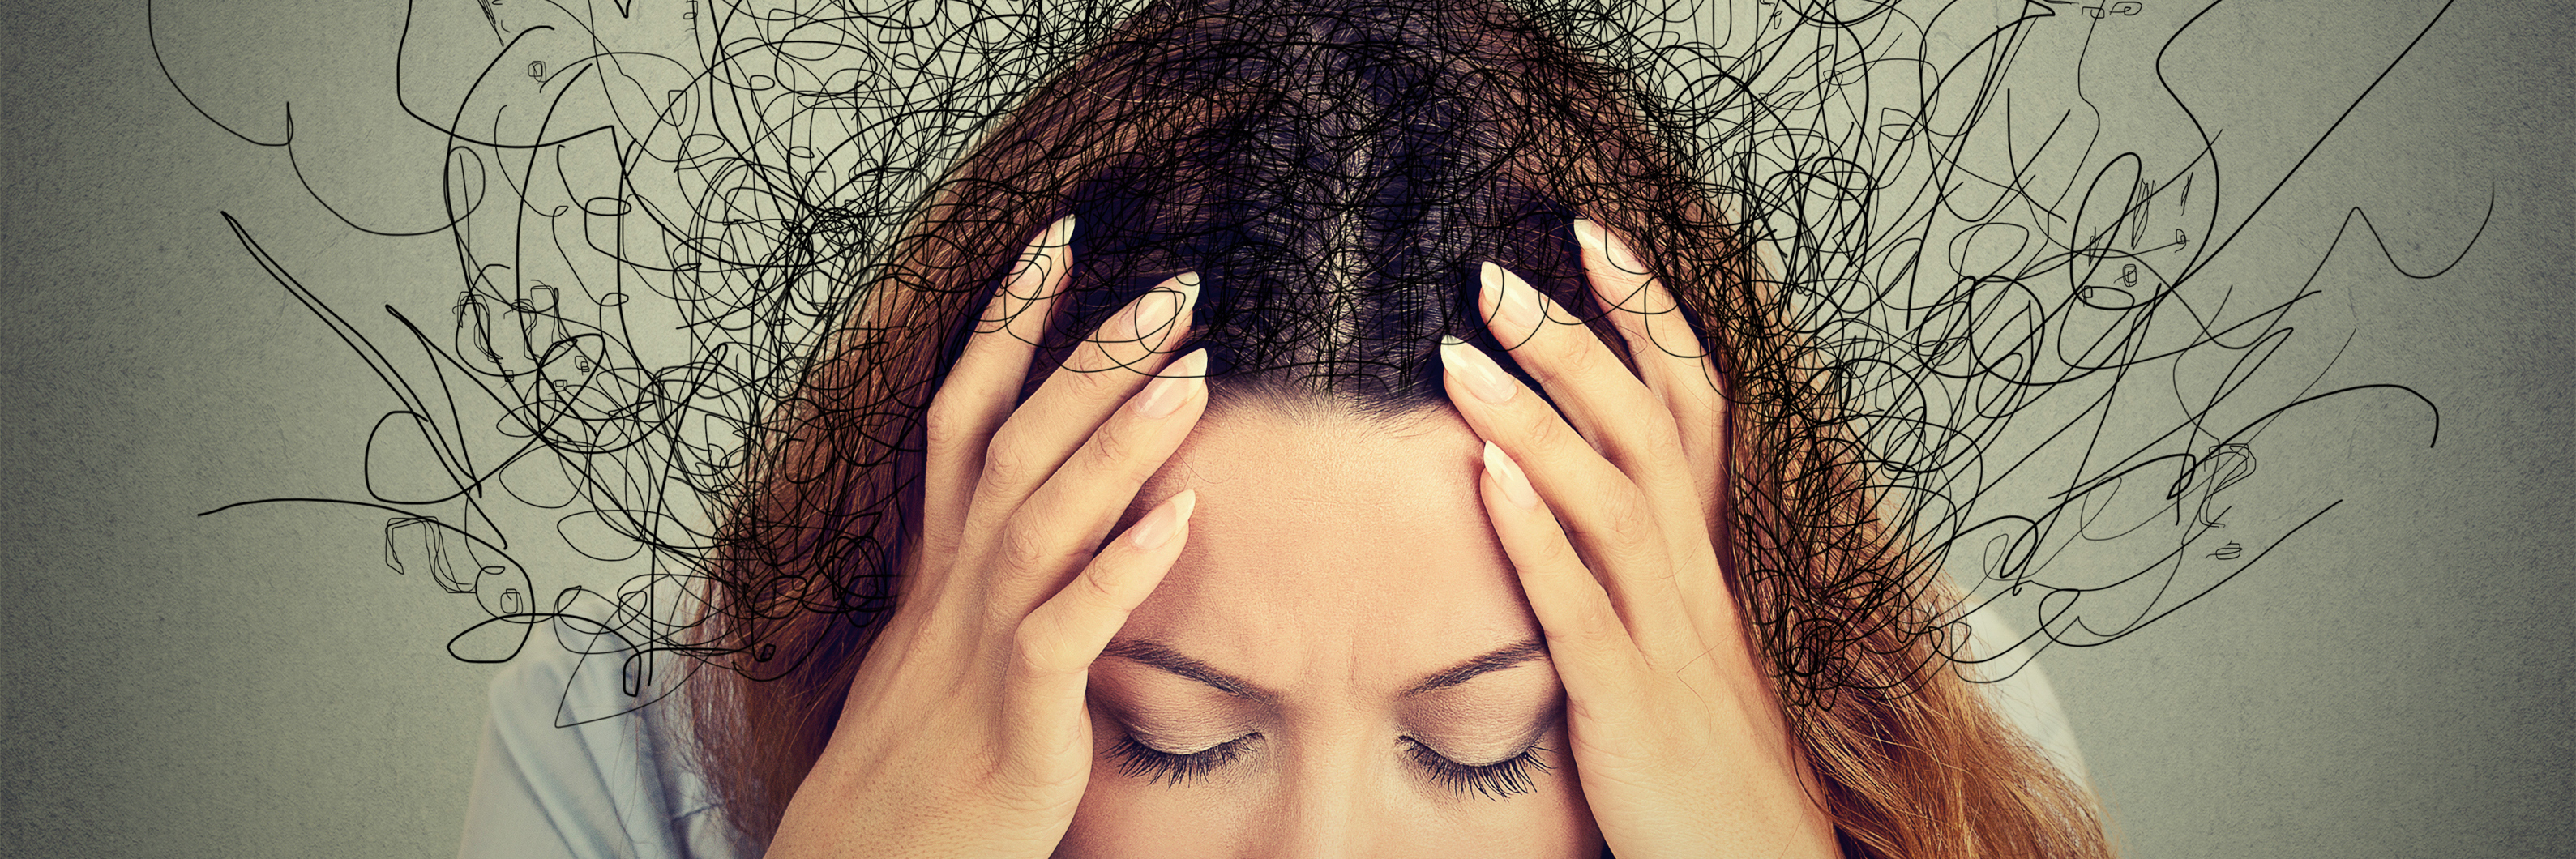 close up photo of woman with hands on head with lines coming from head in messy way